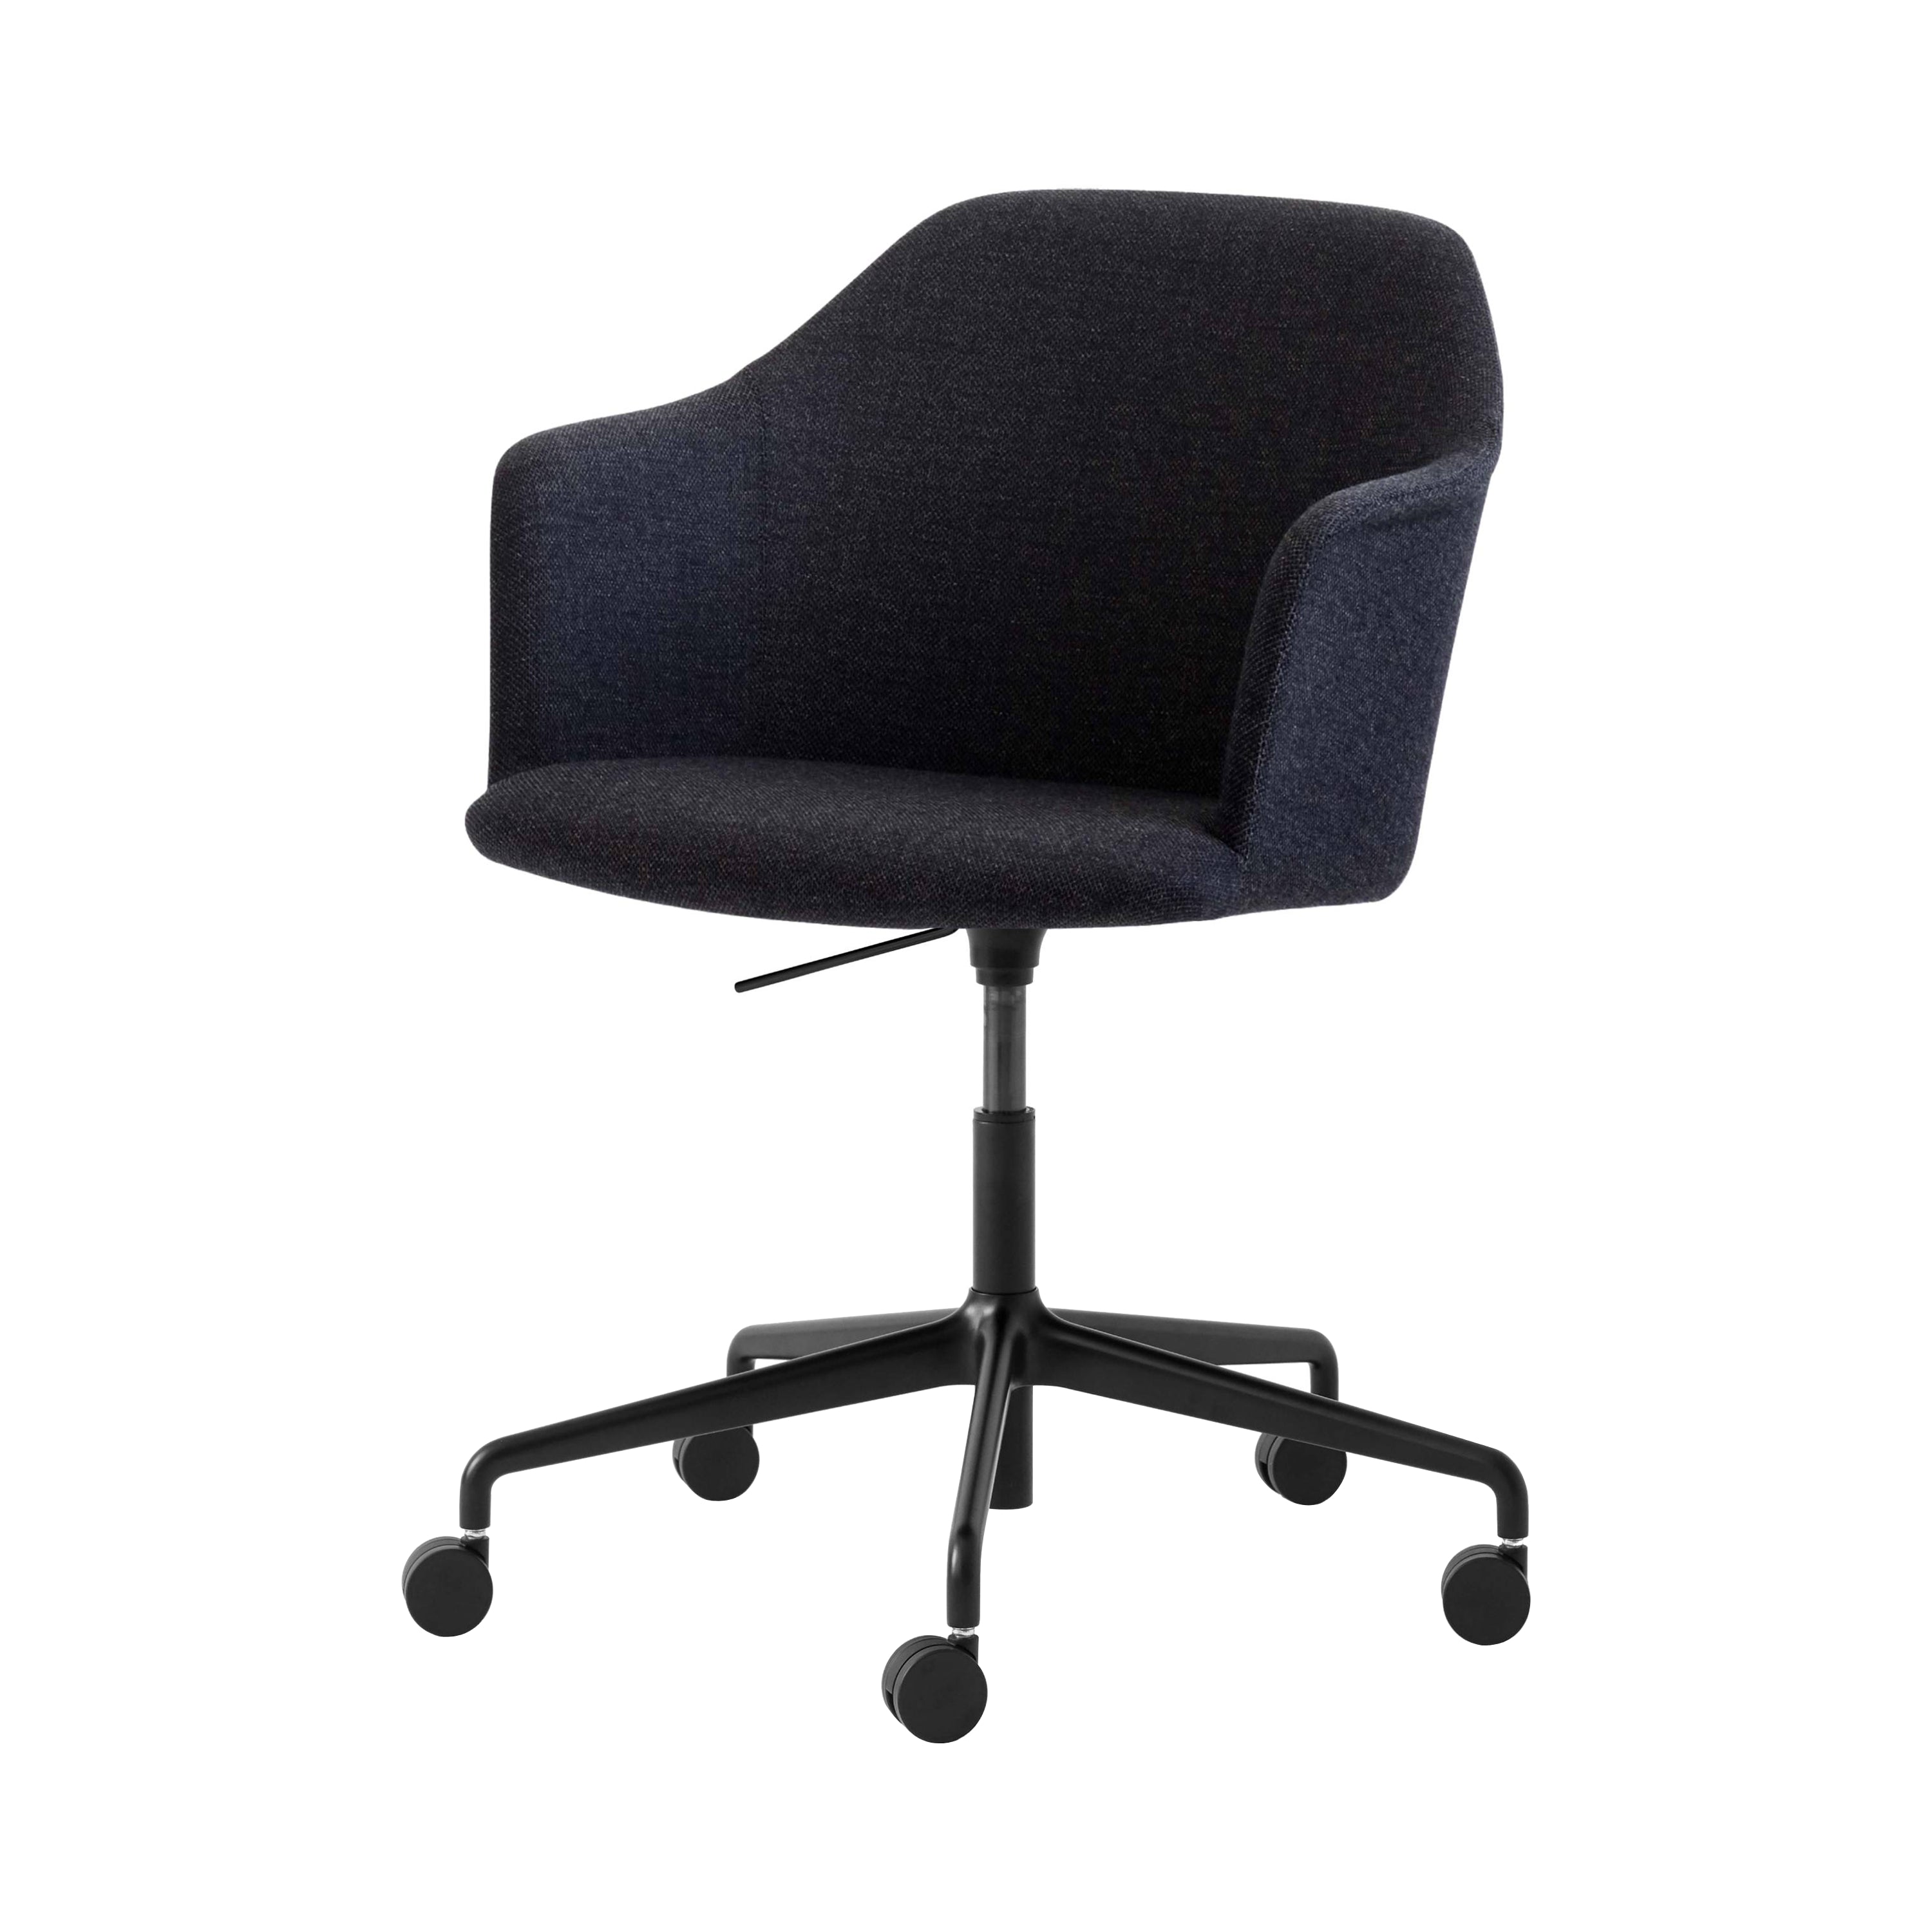 Rely Chair HW55: Black